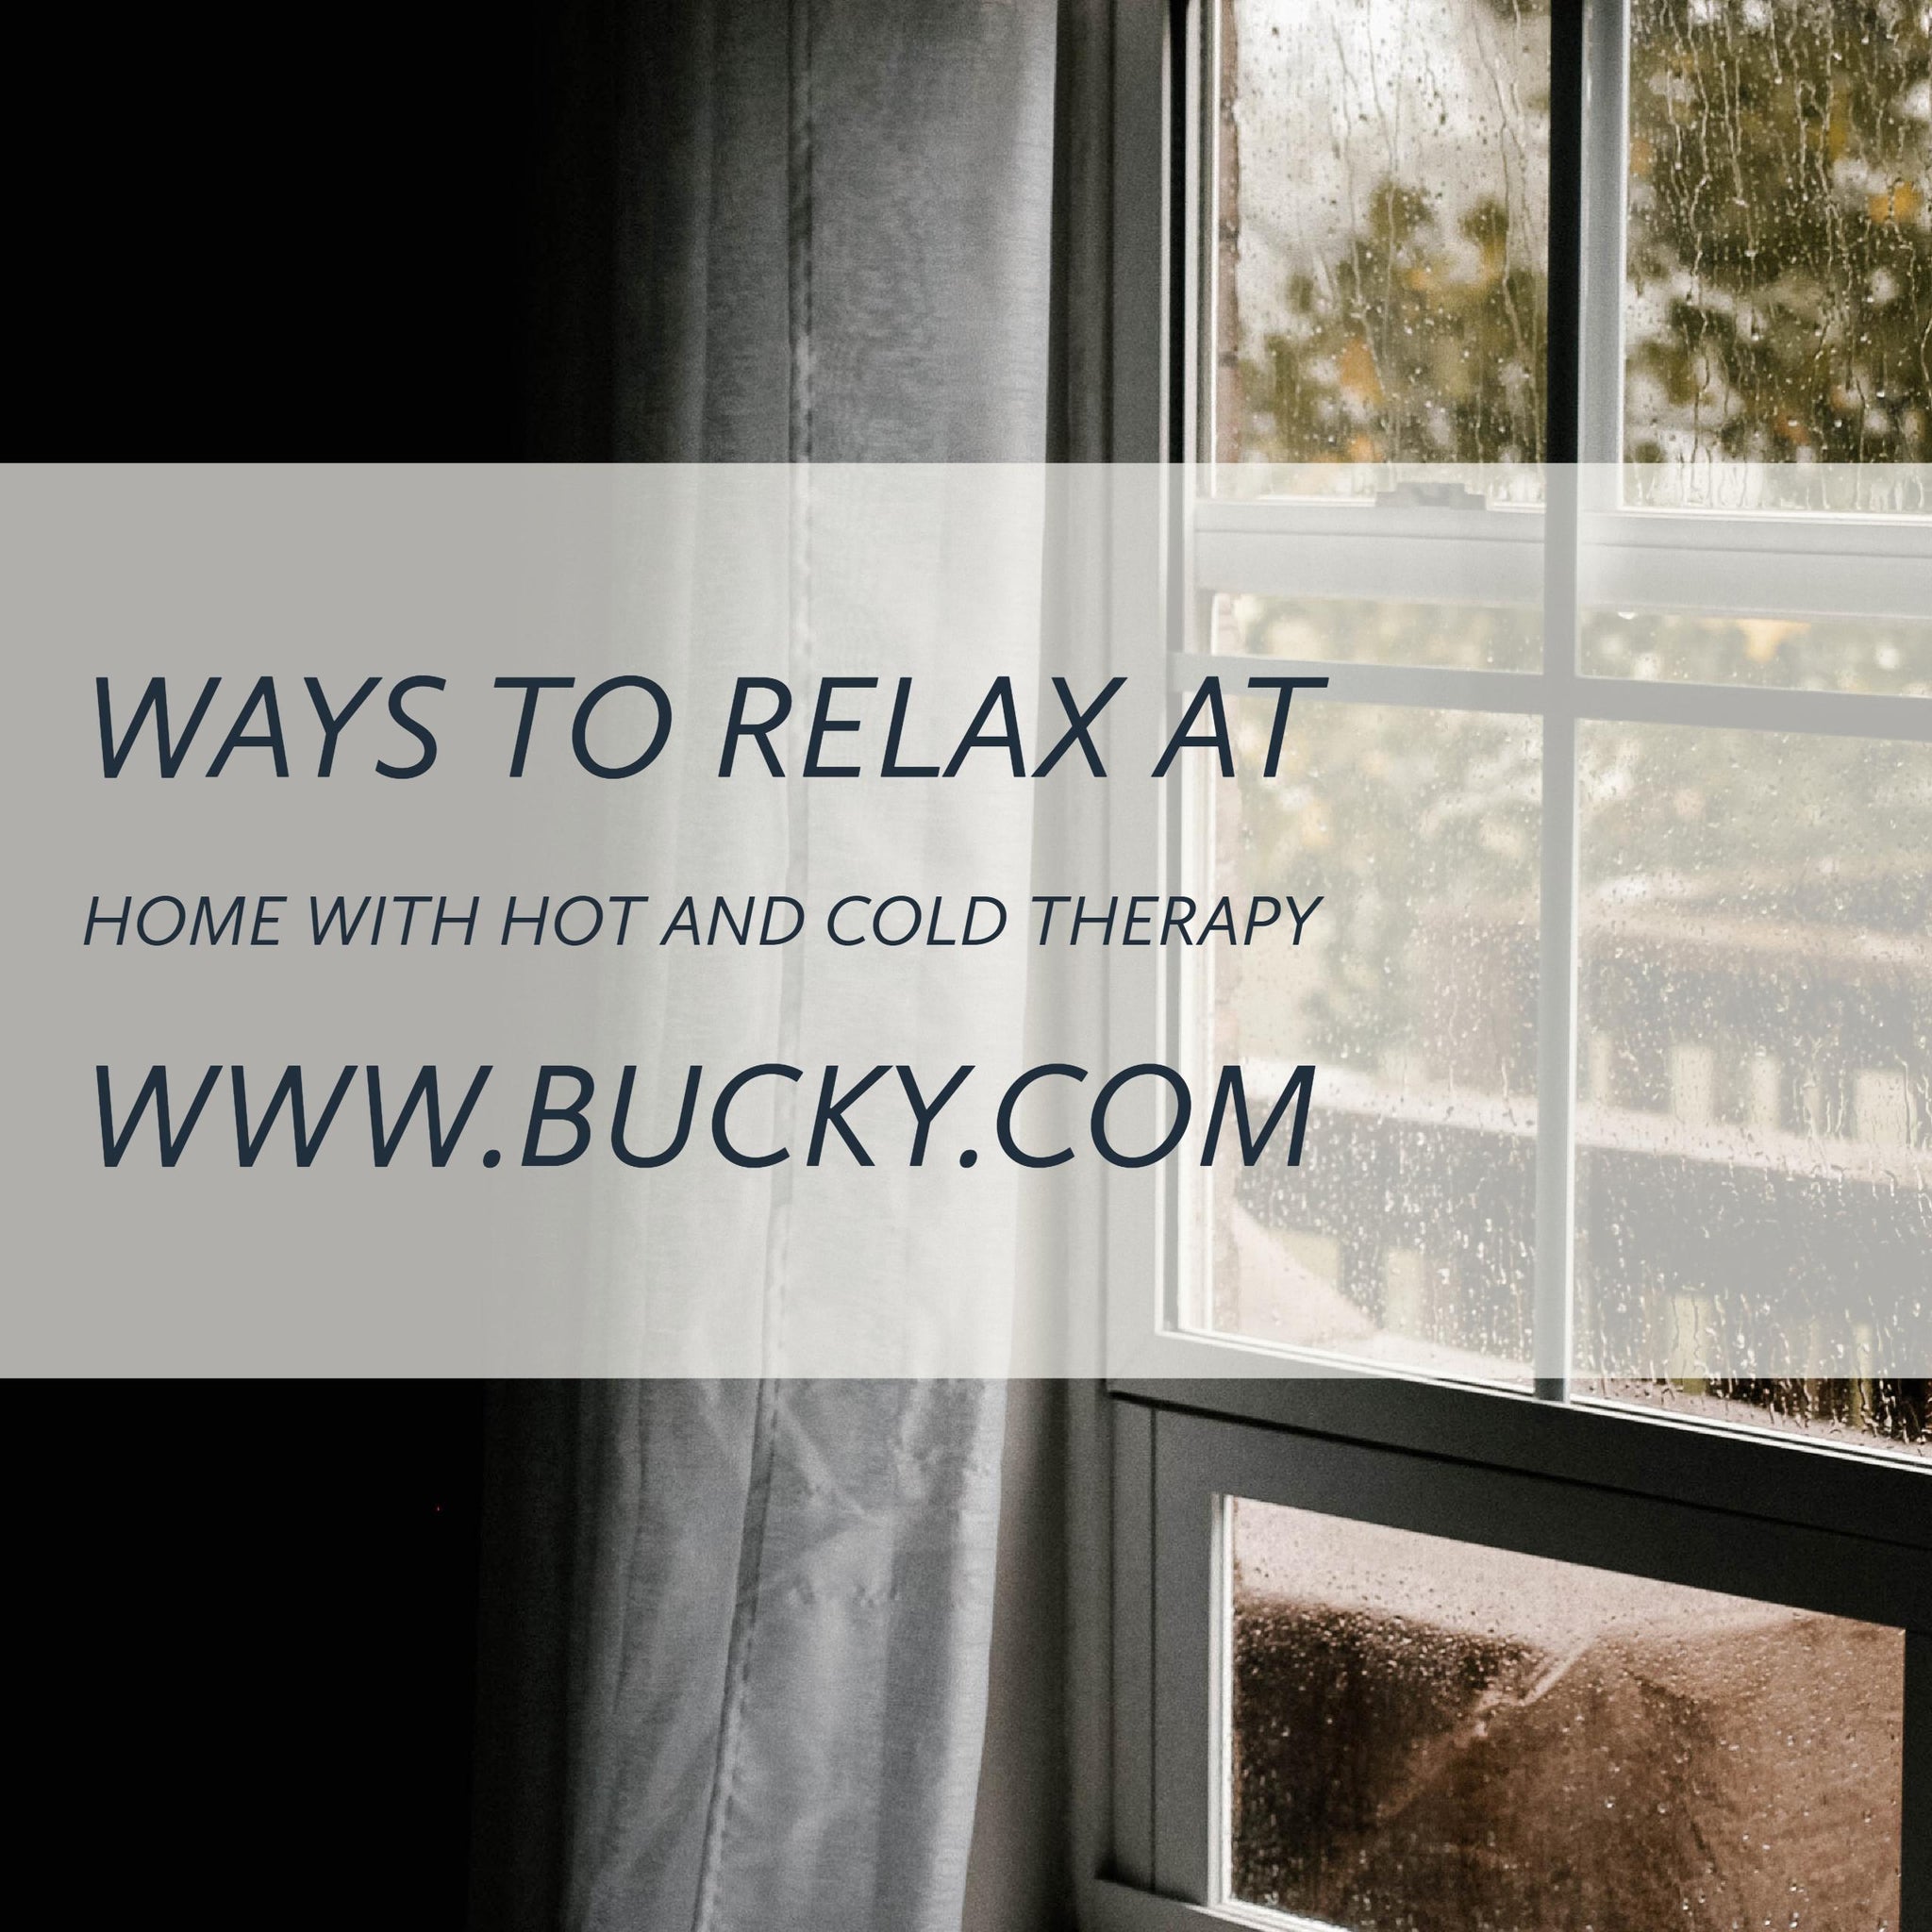 Relax at Home with Hot and Cold Therapy